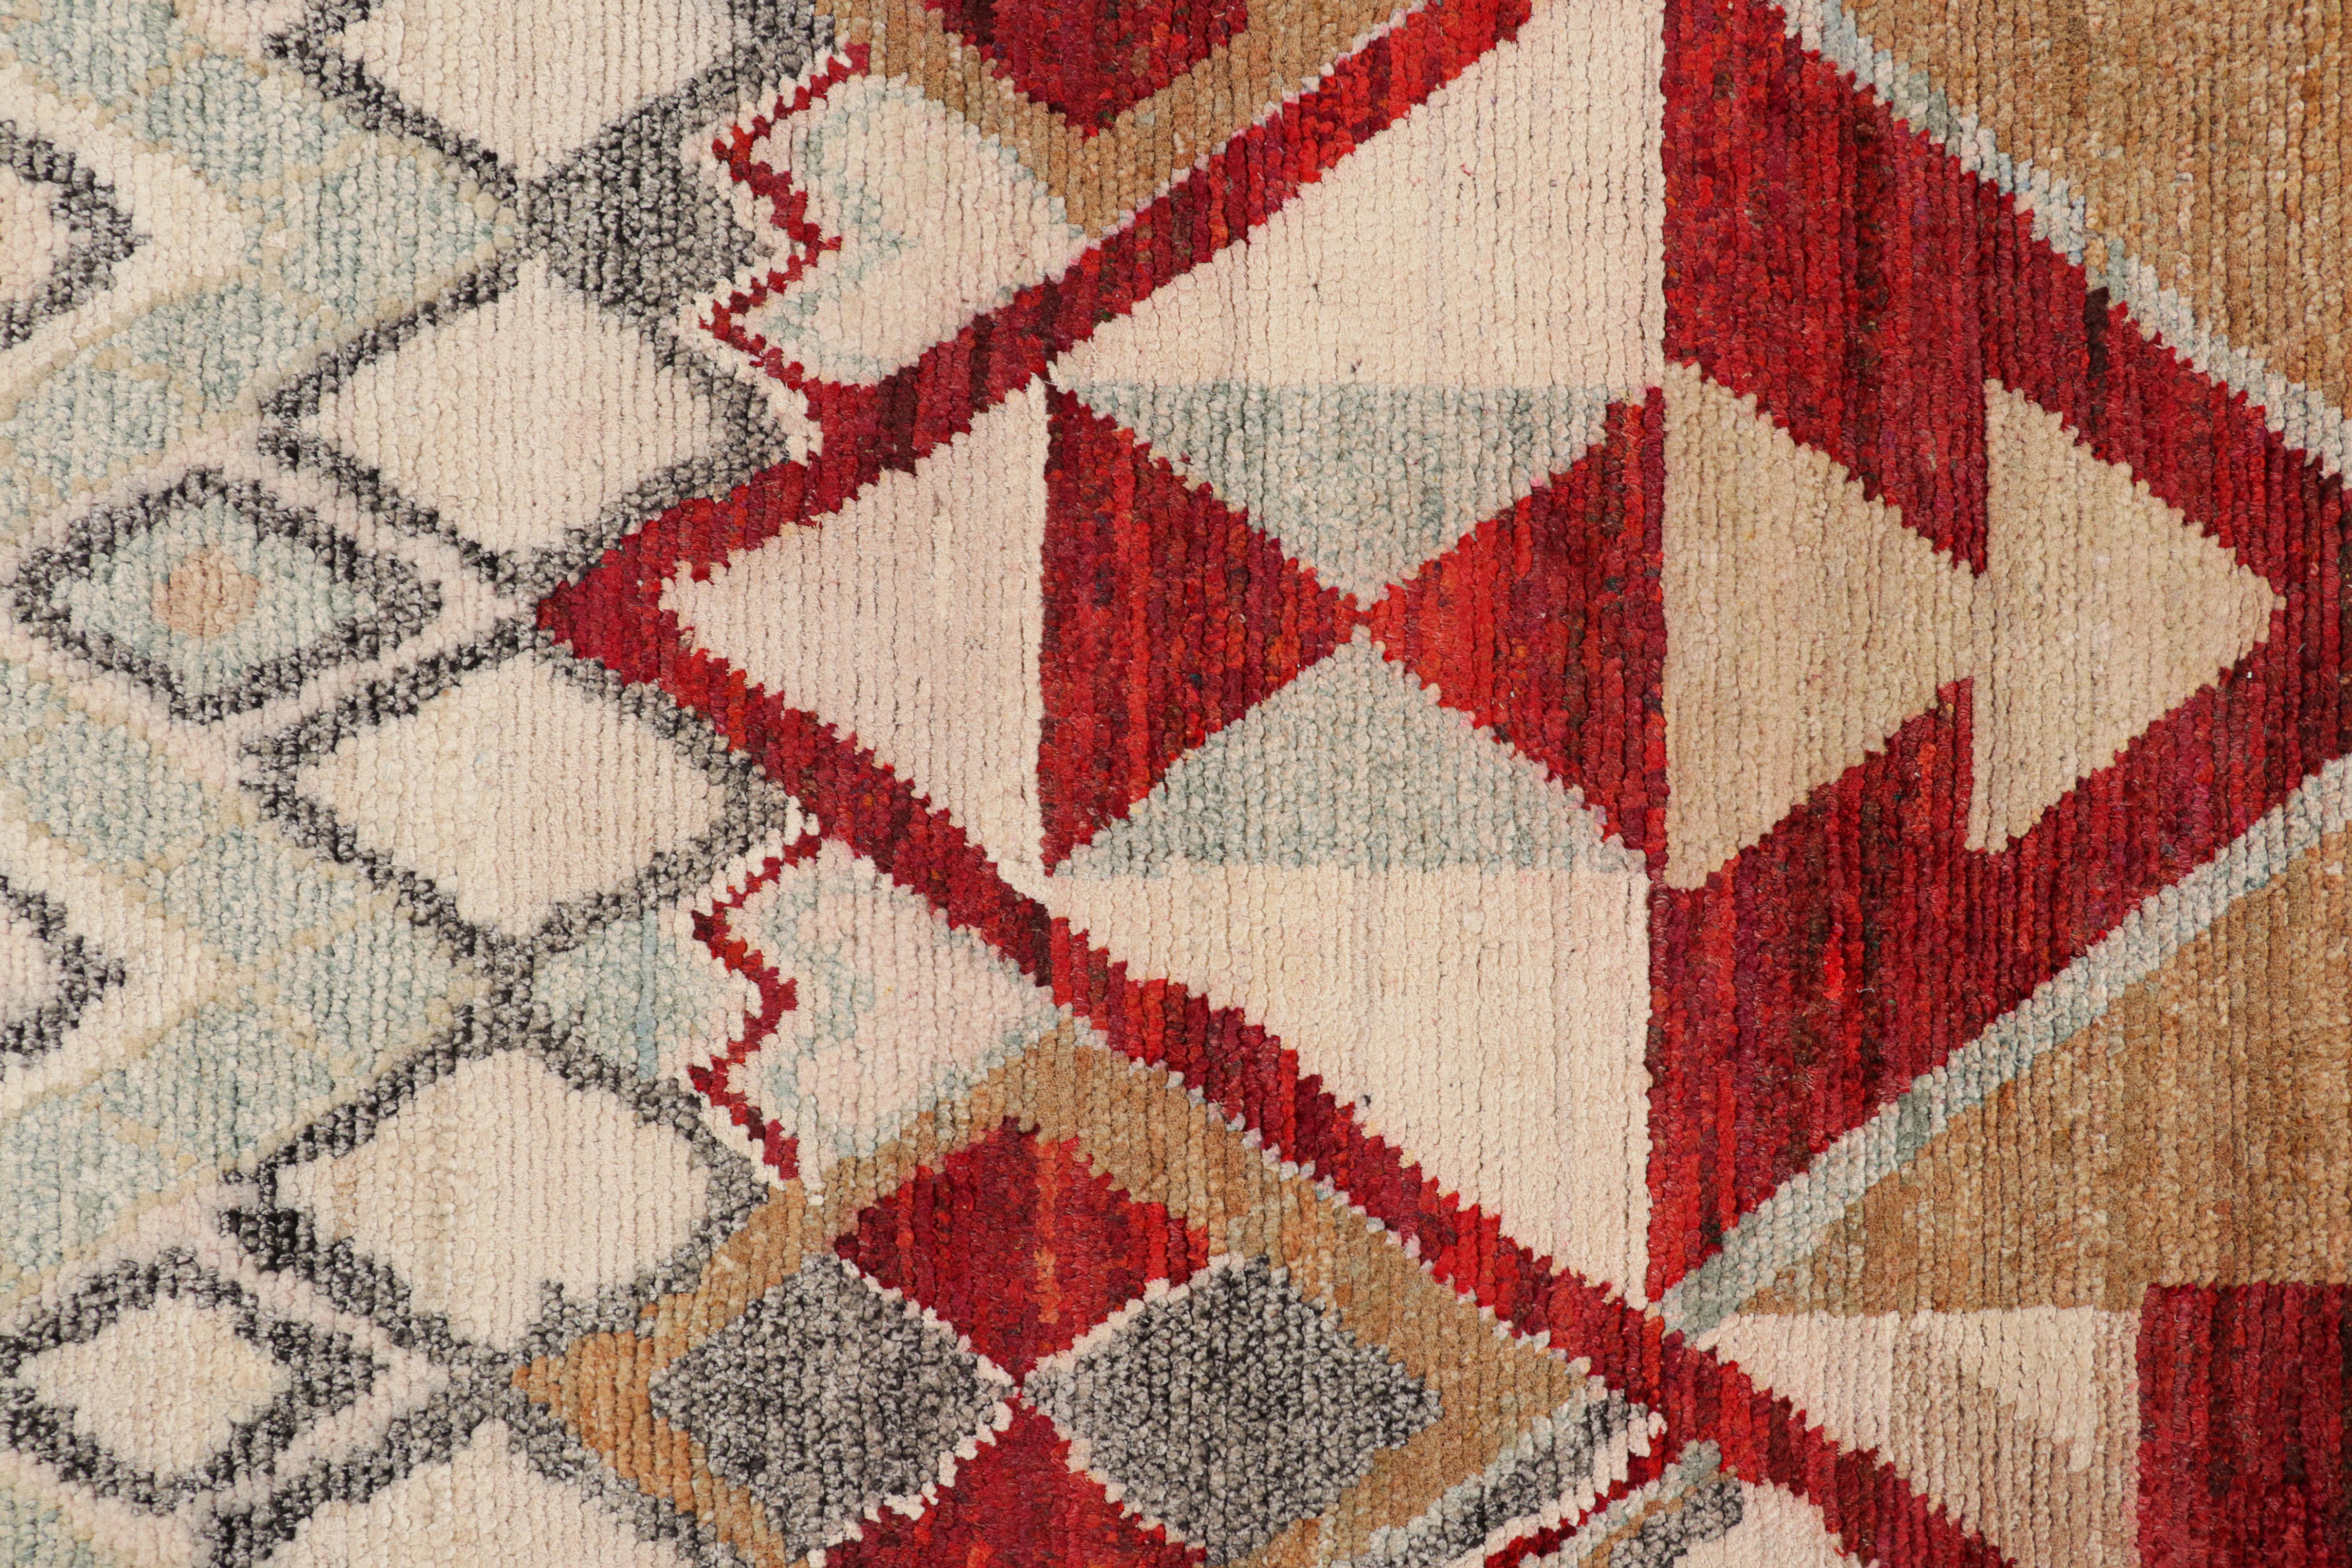 Indian Rug & Kilim’s Contemporary Moroccan Style Rug Polychromatic Geometric Patterns For Sale